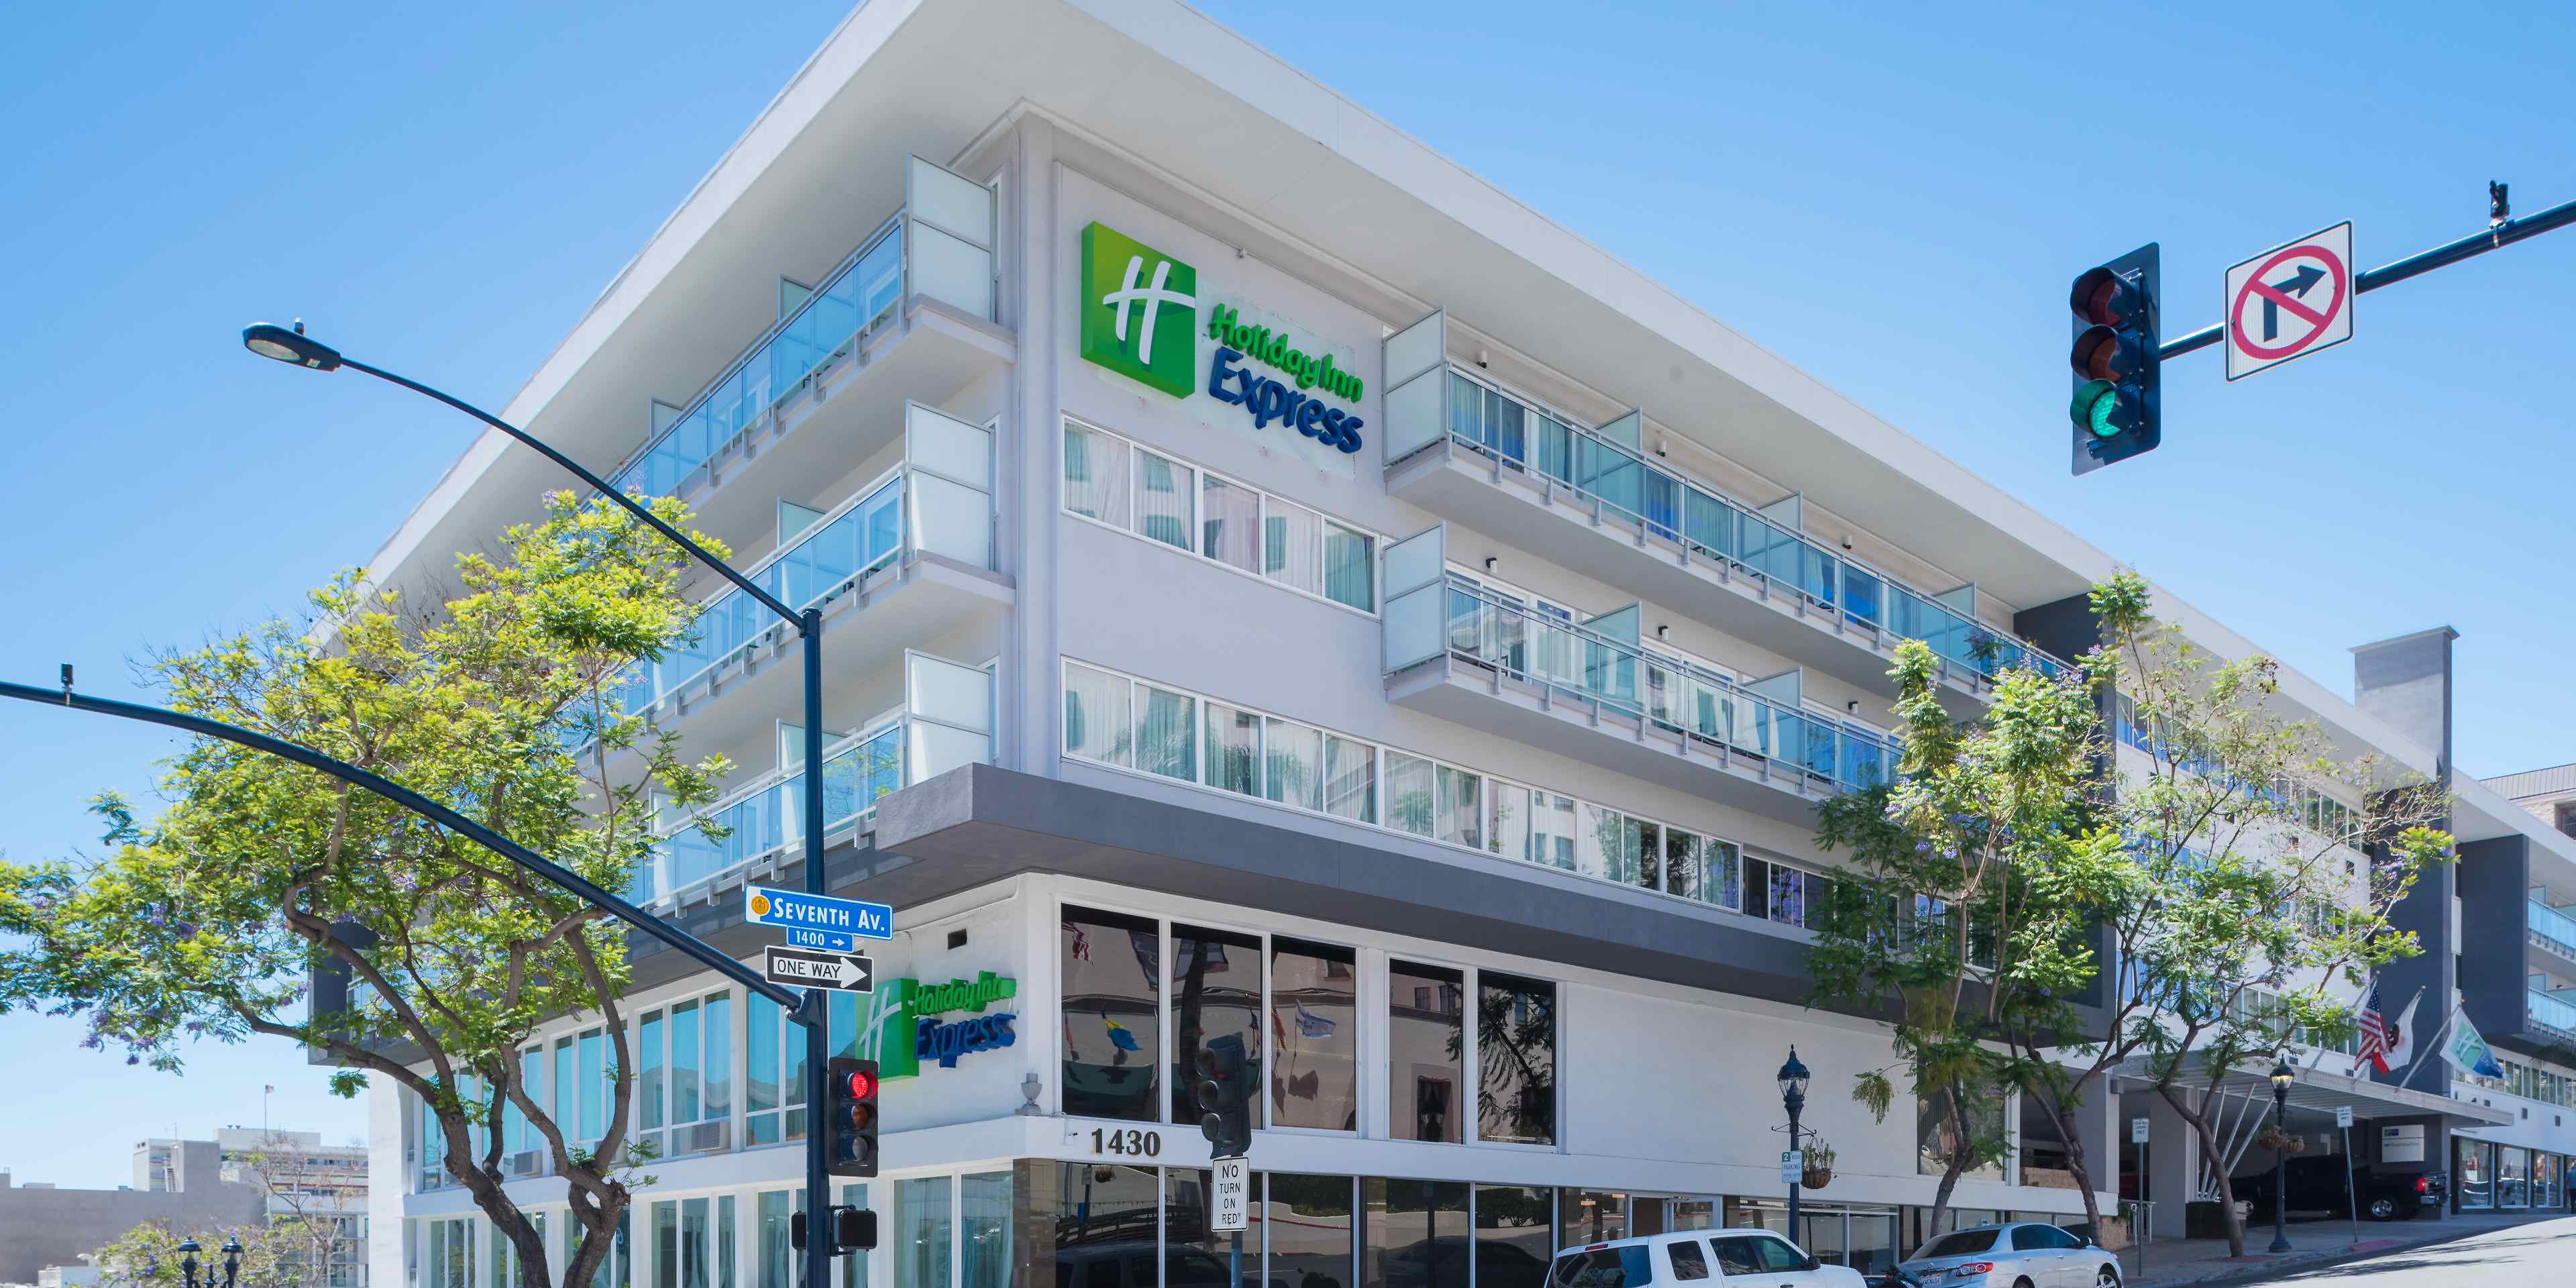 Hotels in Downtown San Diego, CA | Holiday Inn Express San Diego Downtown